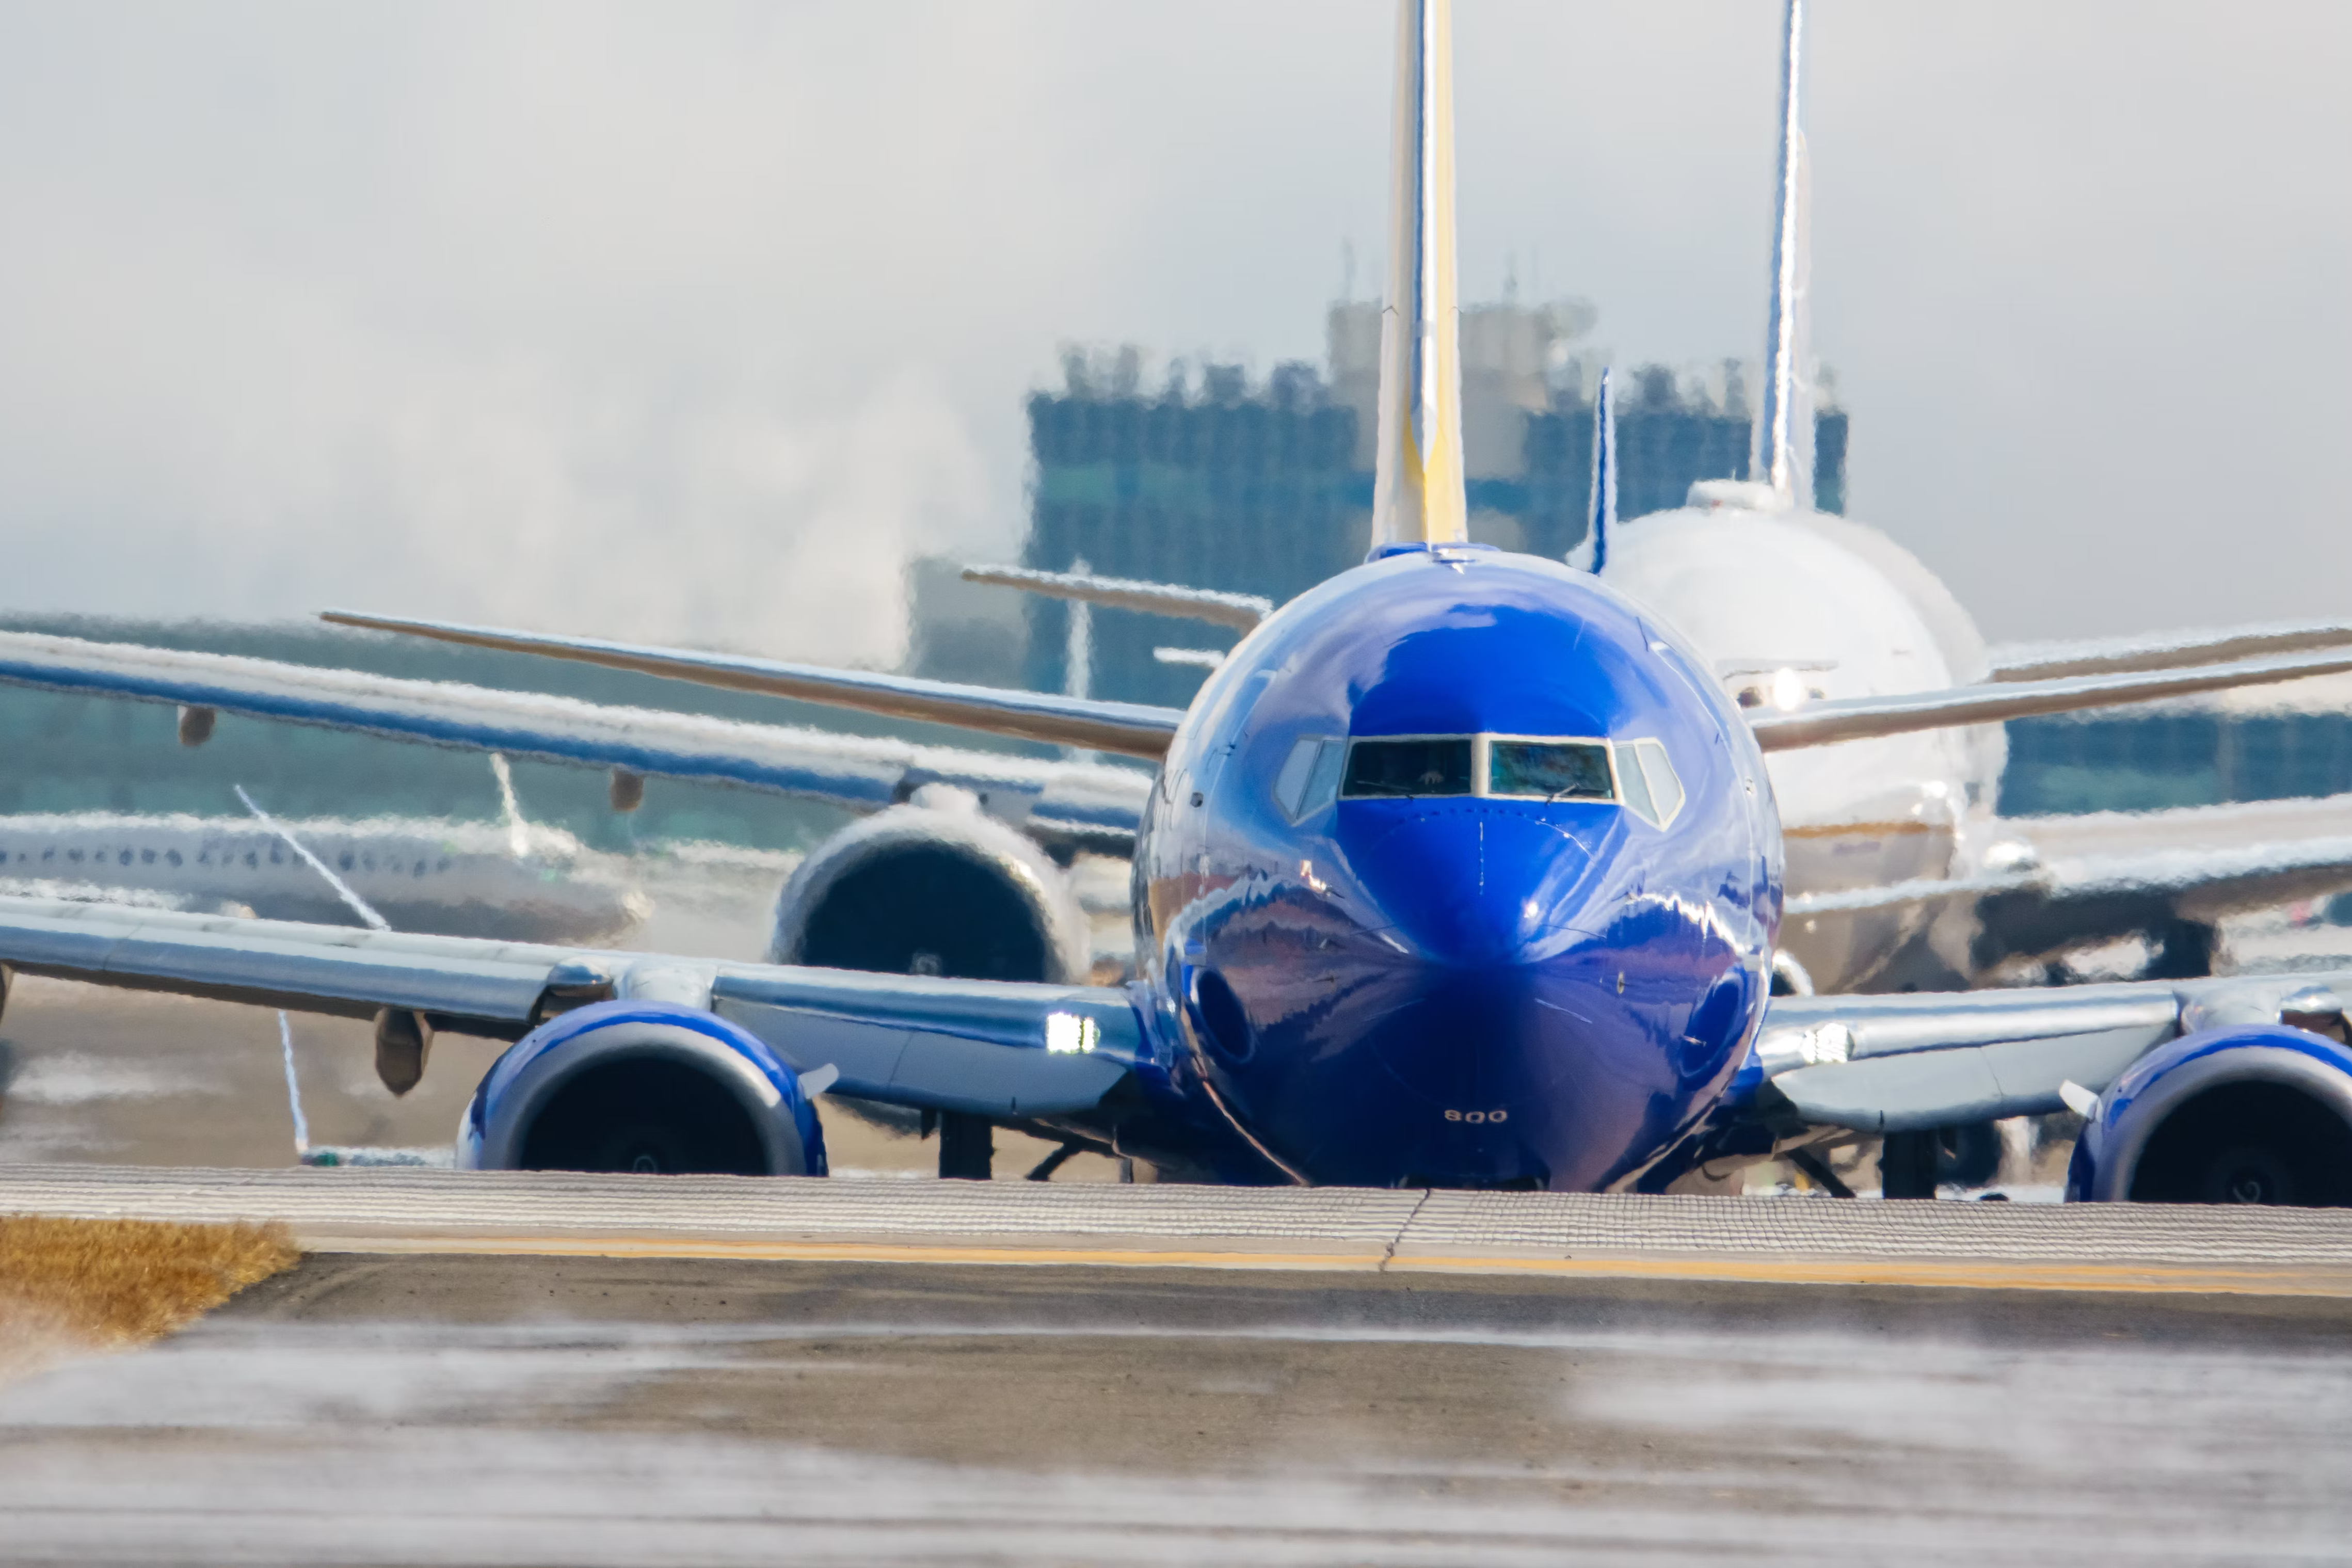 A Southwest Airlines aircraft lined up on a taxiway at Denver International Airport.